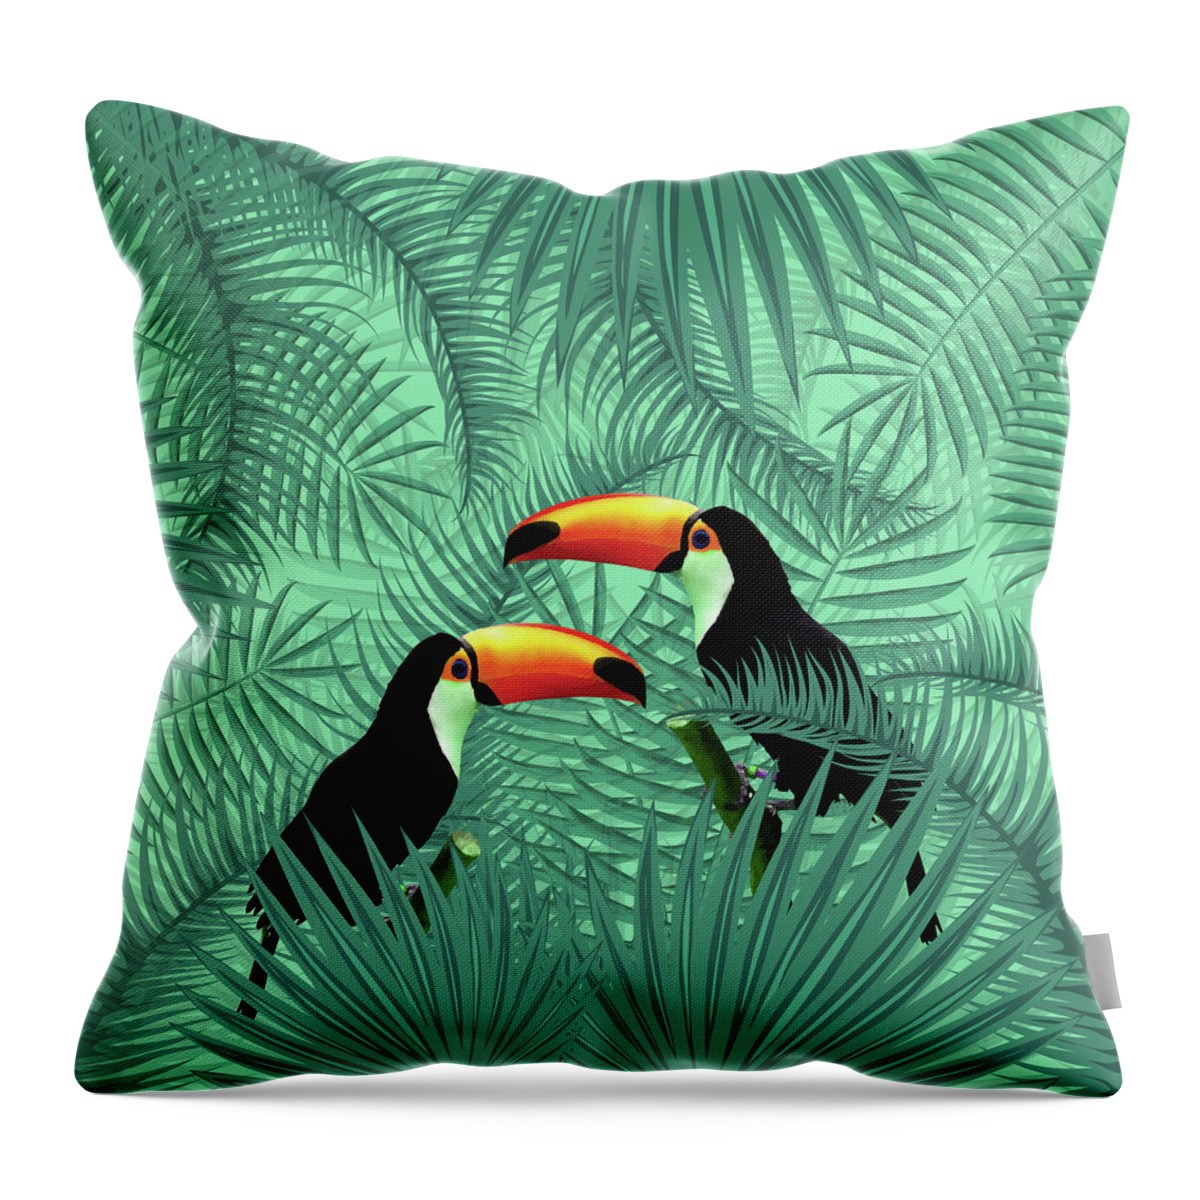 Tropical Throw Pillow featuring the mixed media Tropical Forest - Toucan birds - Tropical Palm Leaf Pattern - Leaf Pattern - Tropical Print 2 by Studio Grafiikka